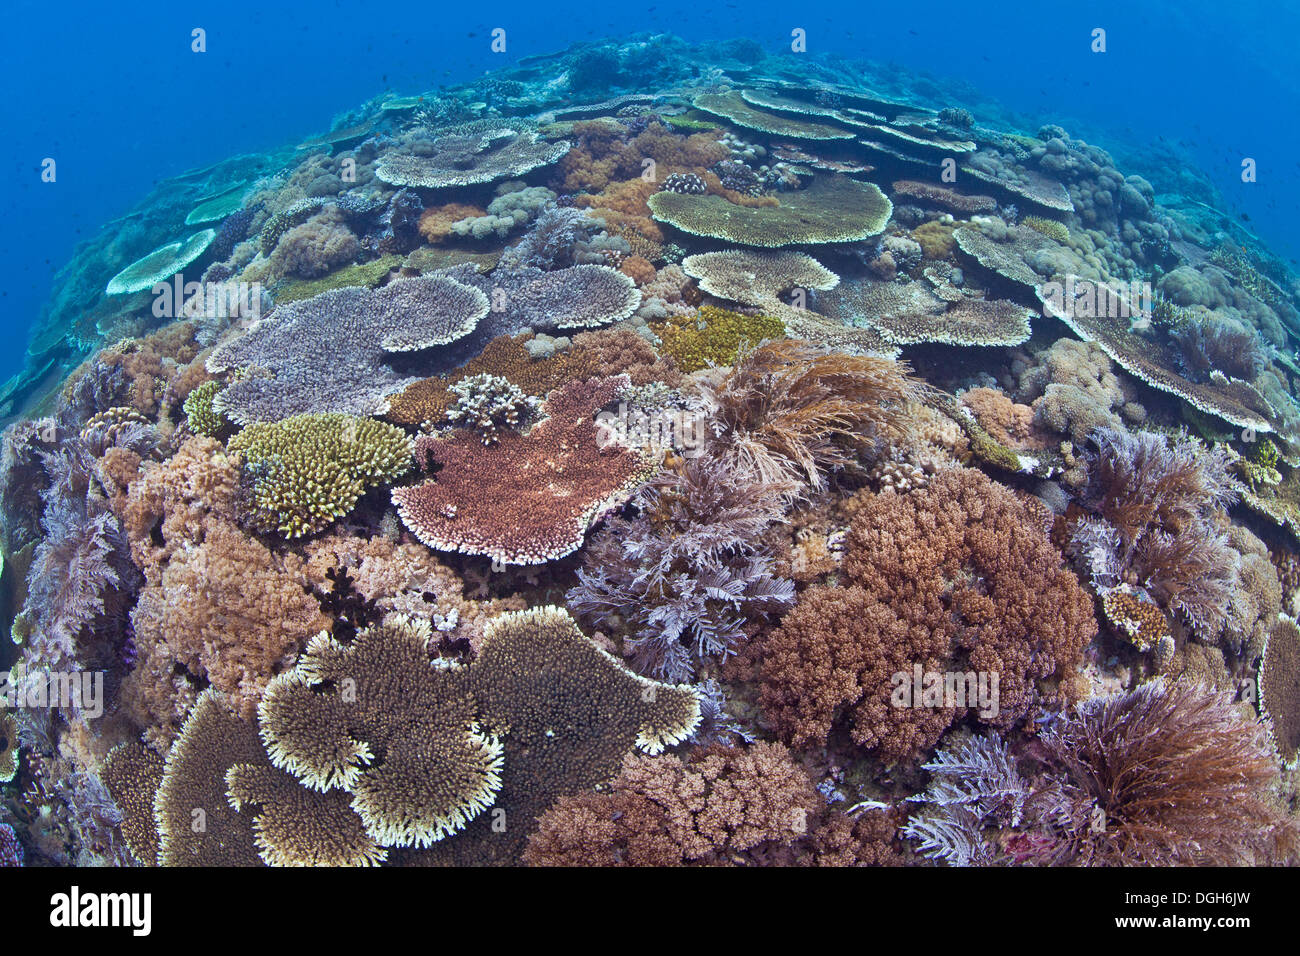 Seascape of large field of colorful table corals (Acropora sp.) in Puerto Galera, Philippines. Stock Photo